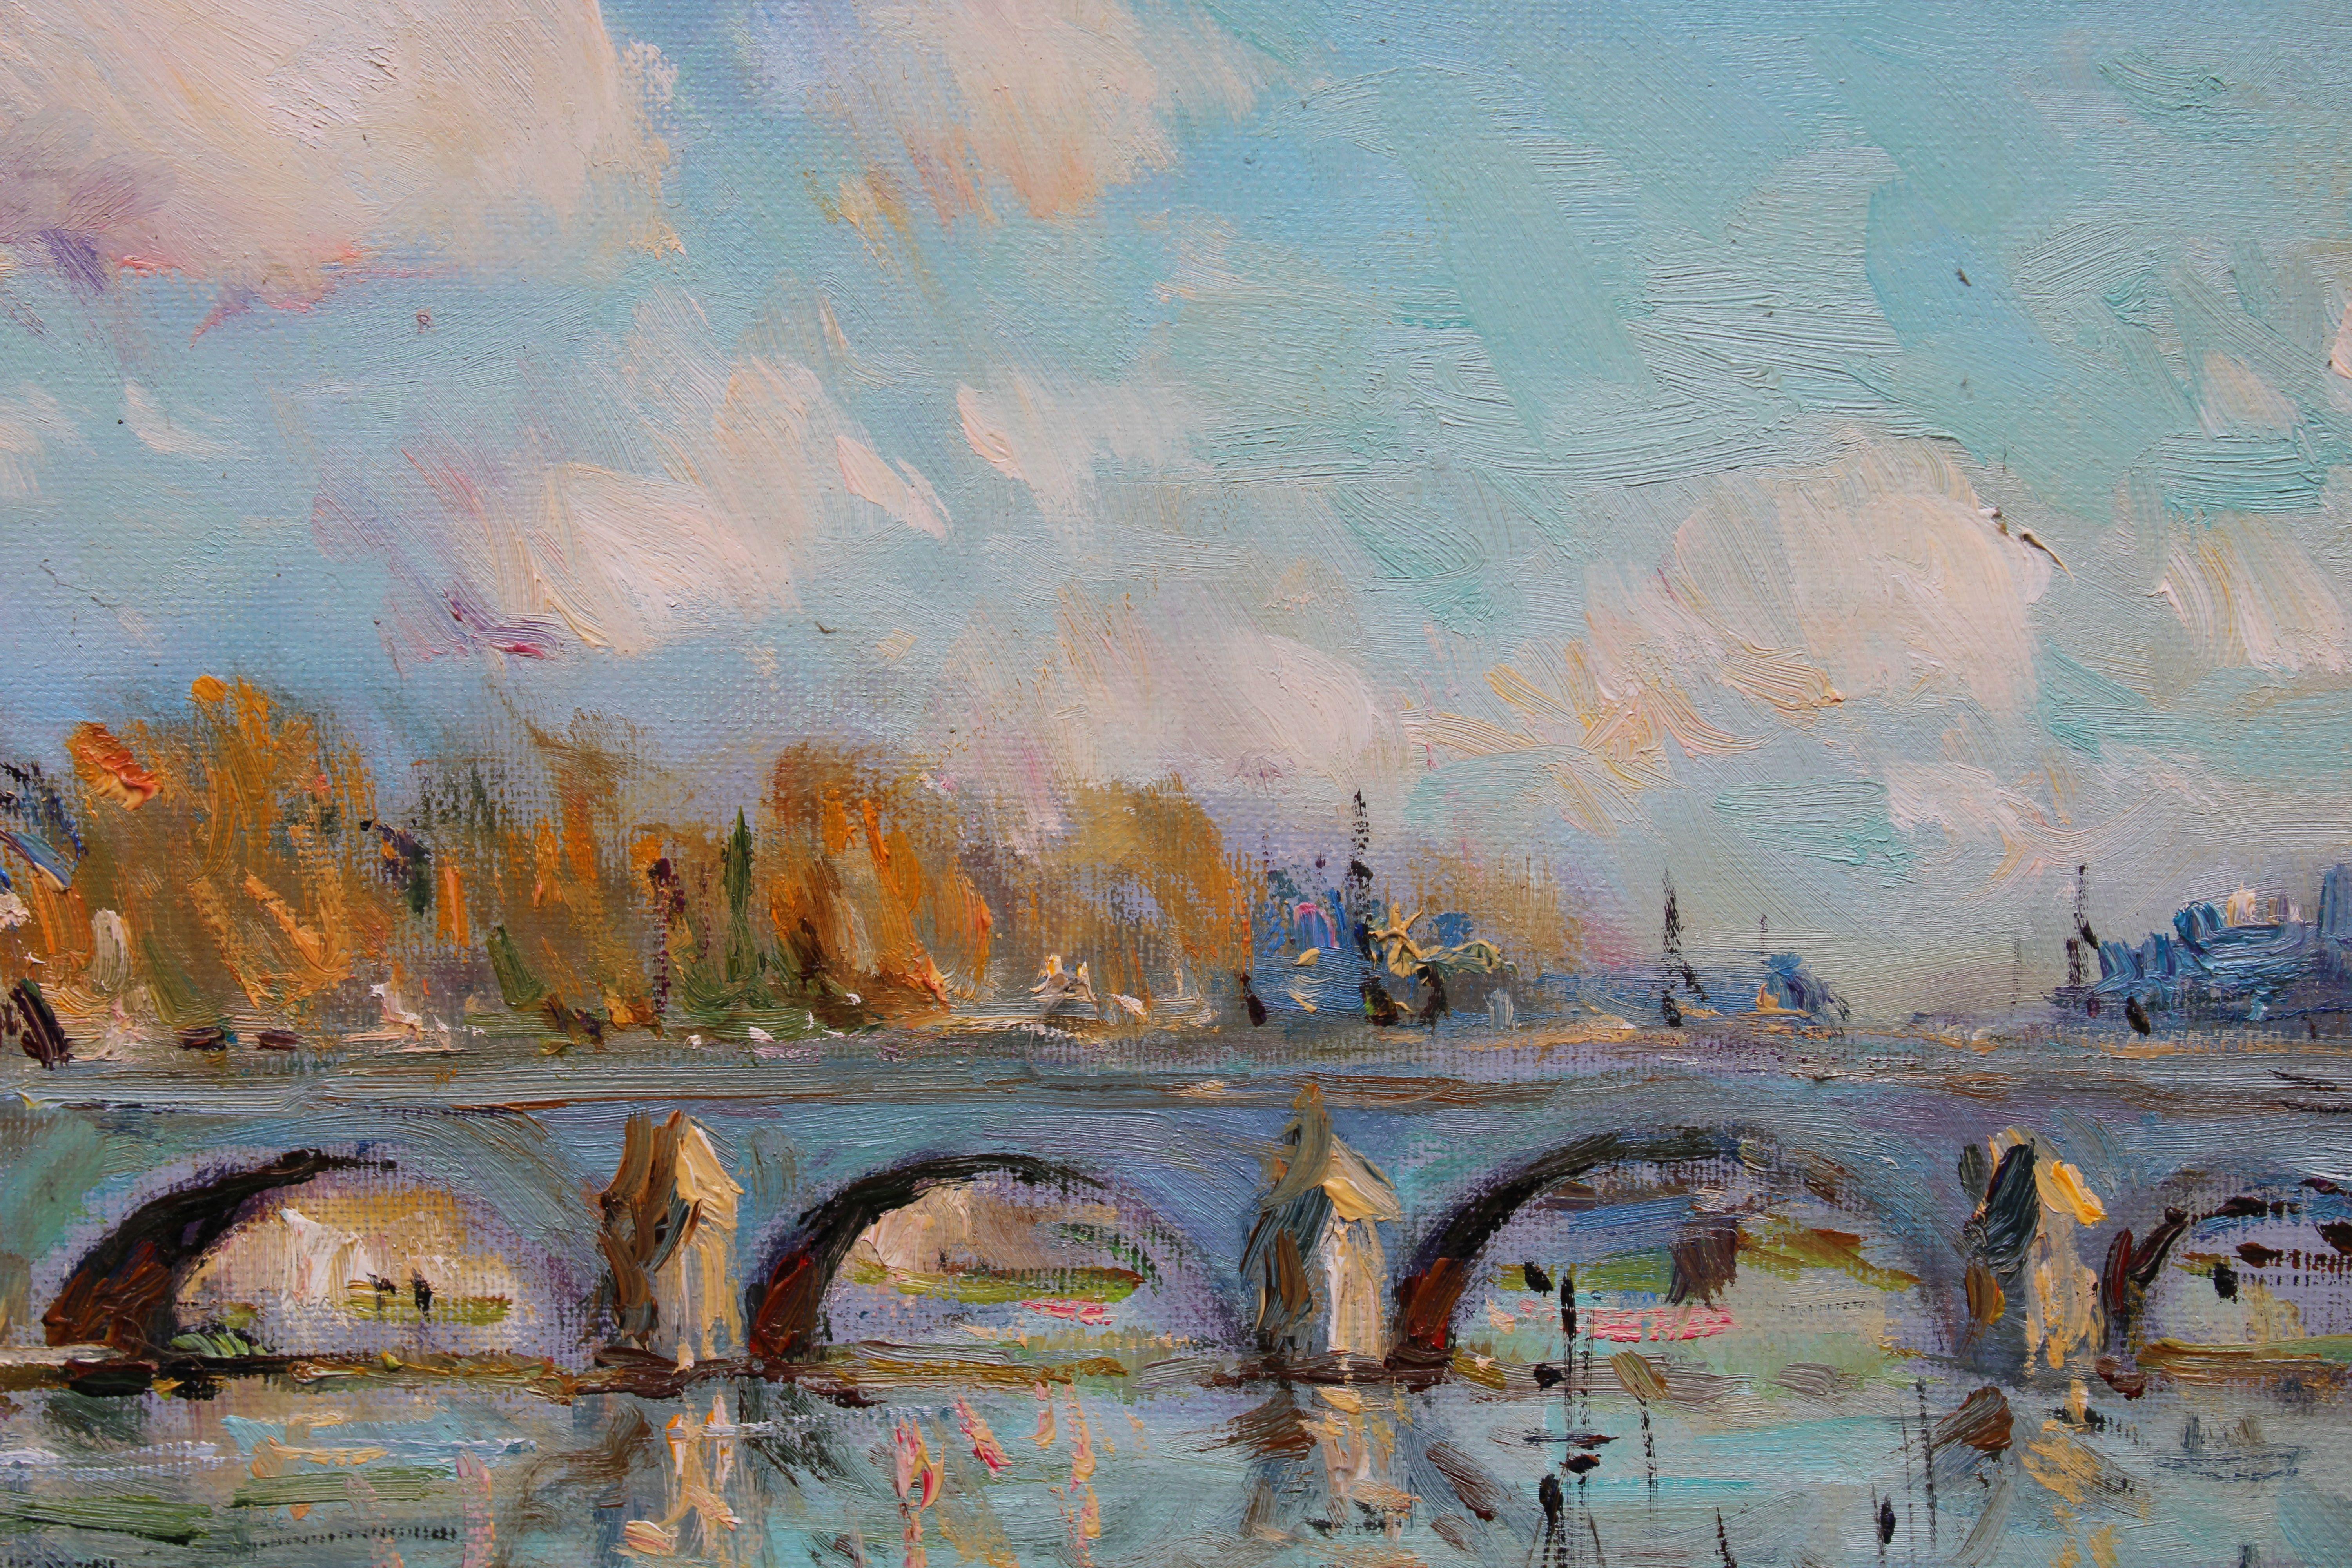 La seine à Paris. Oil on canvas, 38x46.5 cm

The artwork depicts a landscape scene of the Seine River in Paris.

The dominant color palette of the painting consists of bright tones, with a particular emphasis on light blue hues. This choice of color